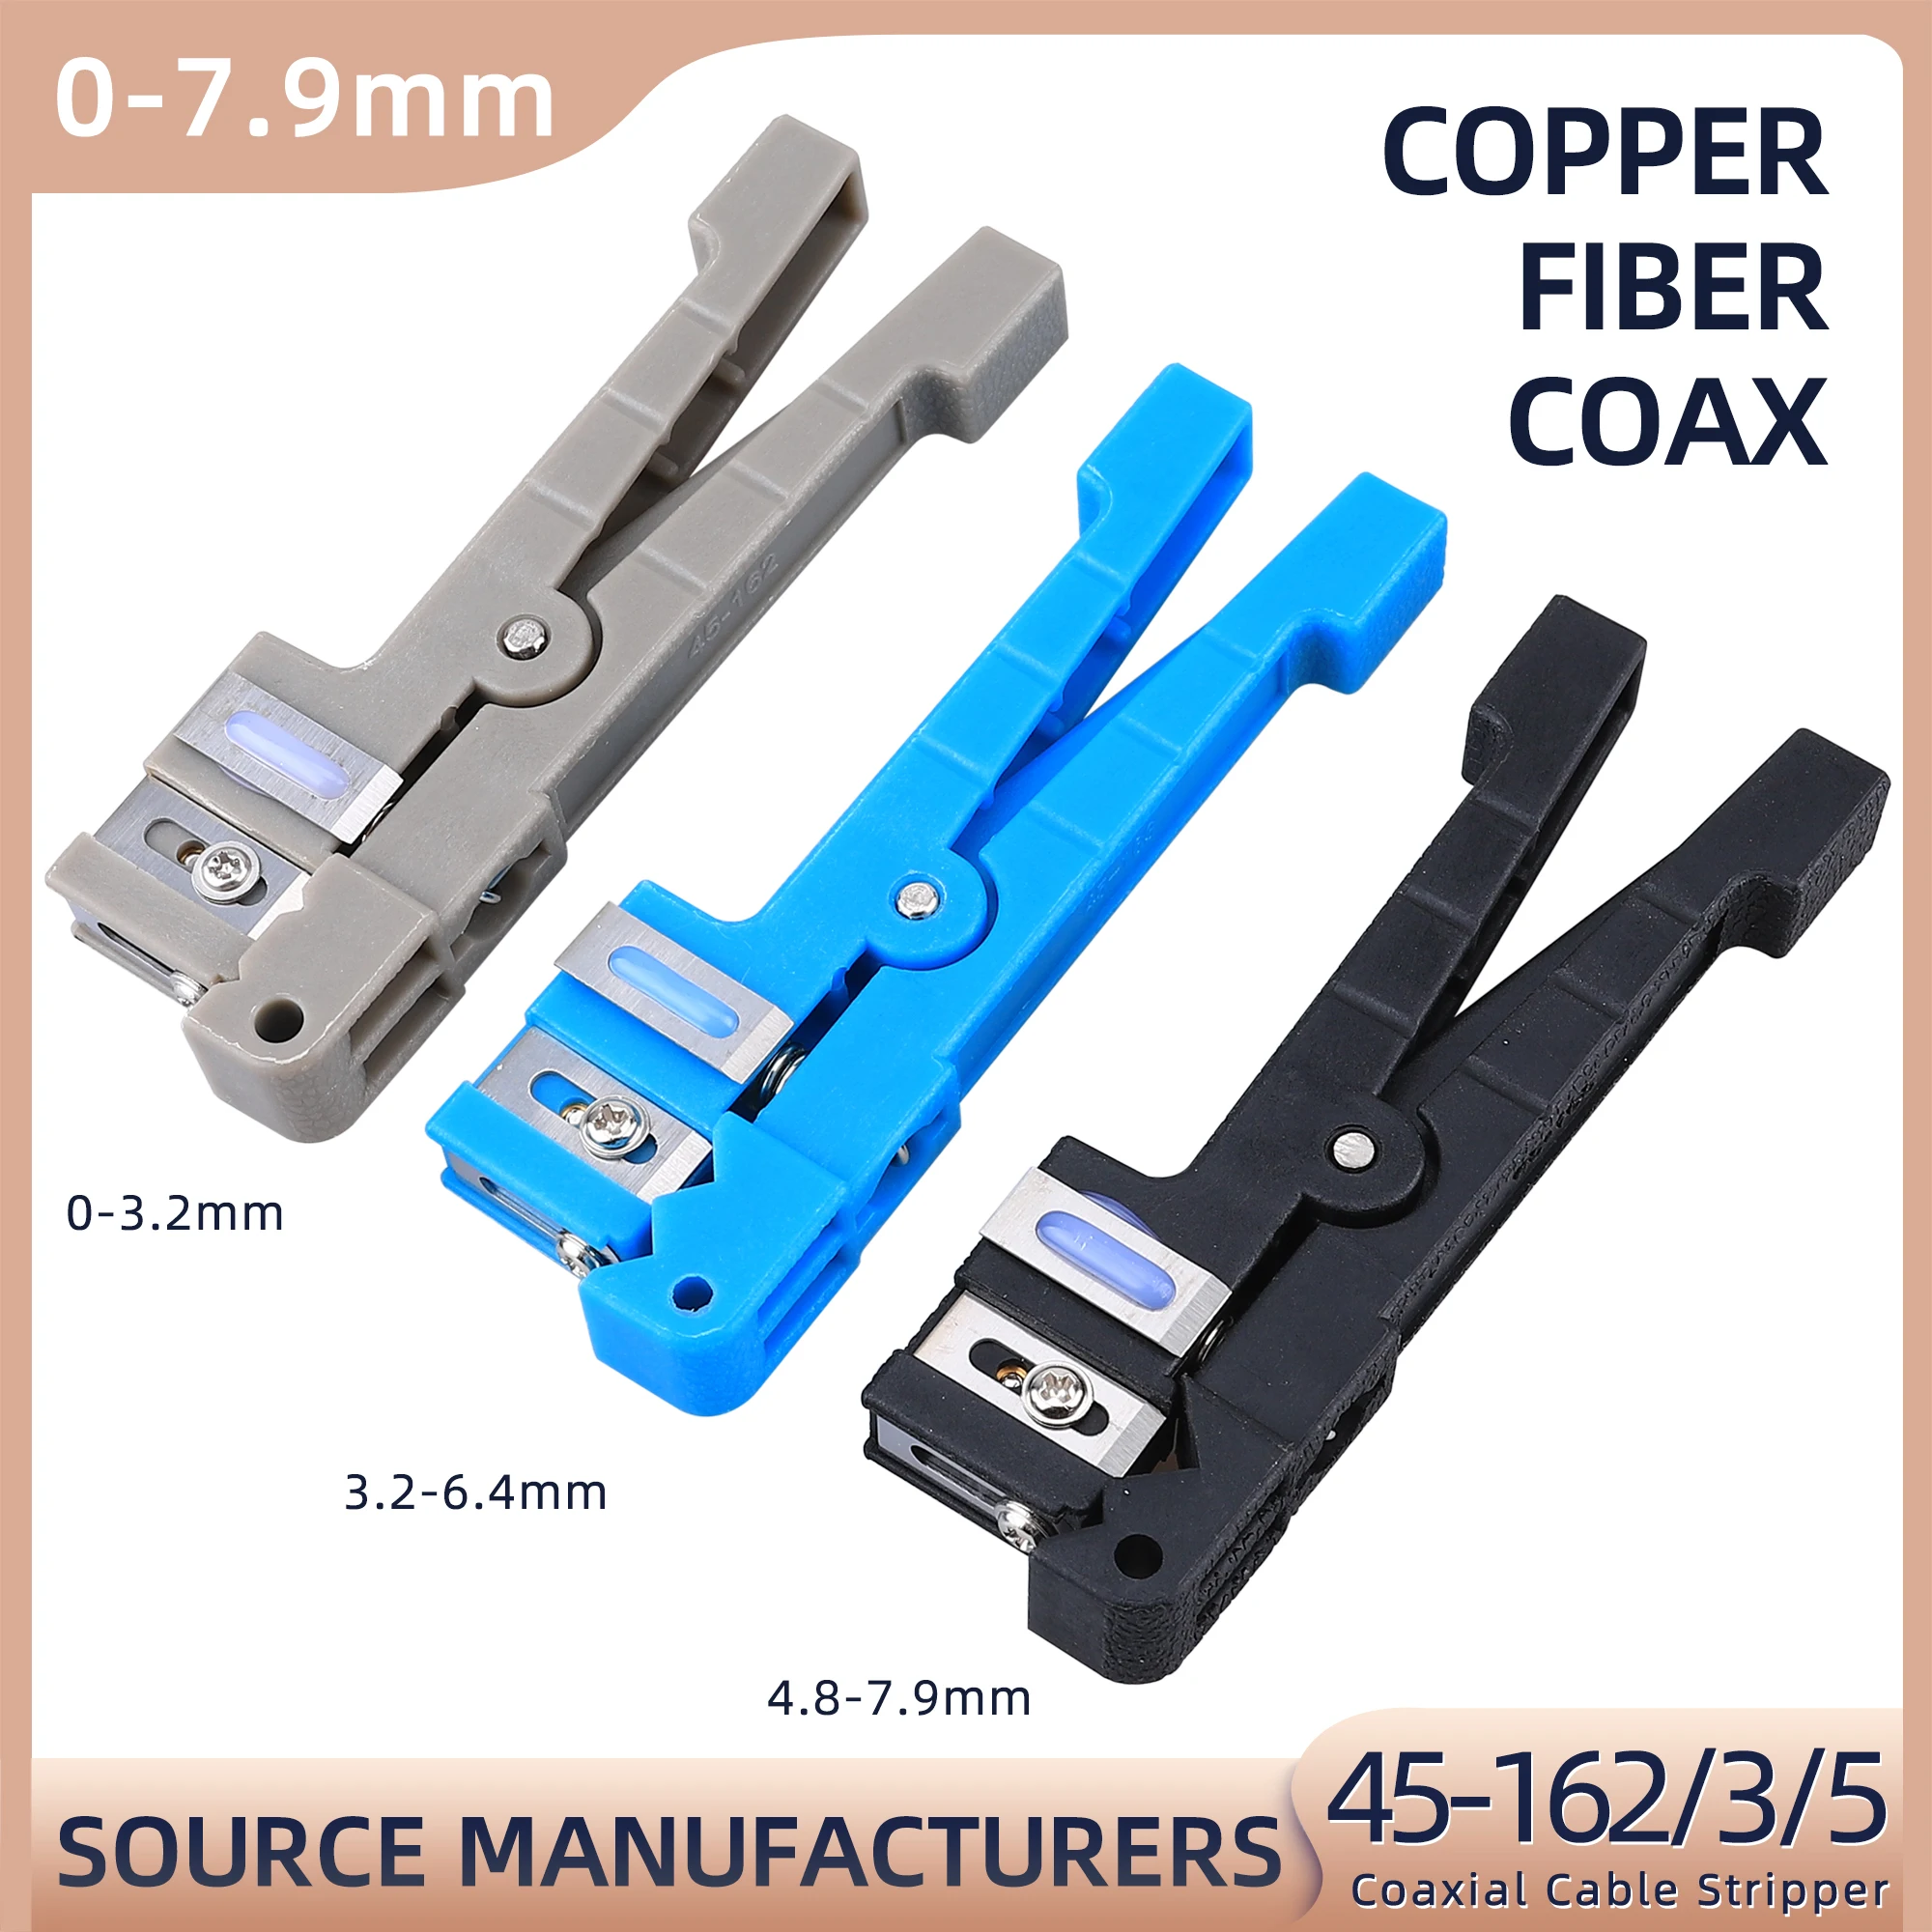 

45-162 Coaxial Cable Stripper 45-163 Fiber Optic Wire Stripper Transverse Beam Tube Open and Stripping Knife Loose Casing 45-165